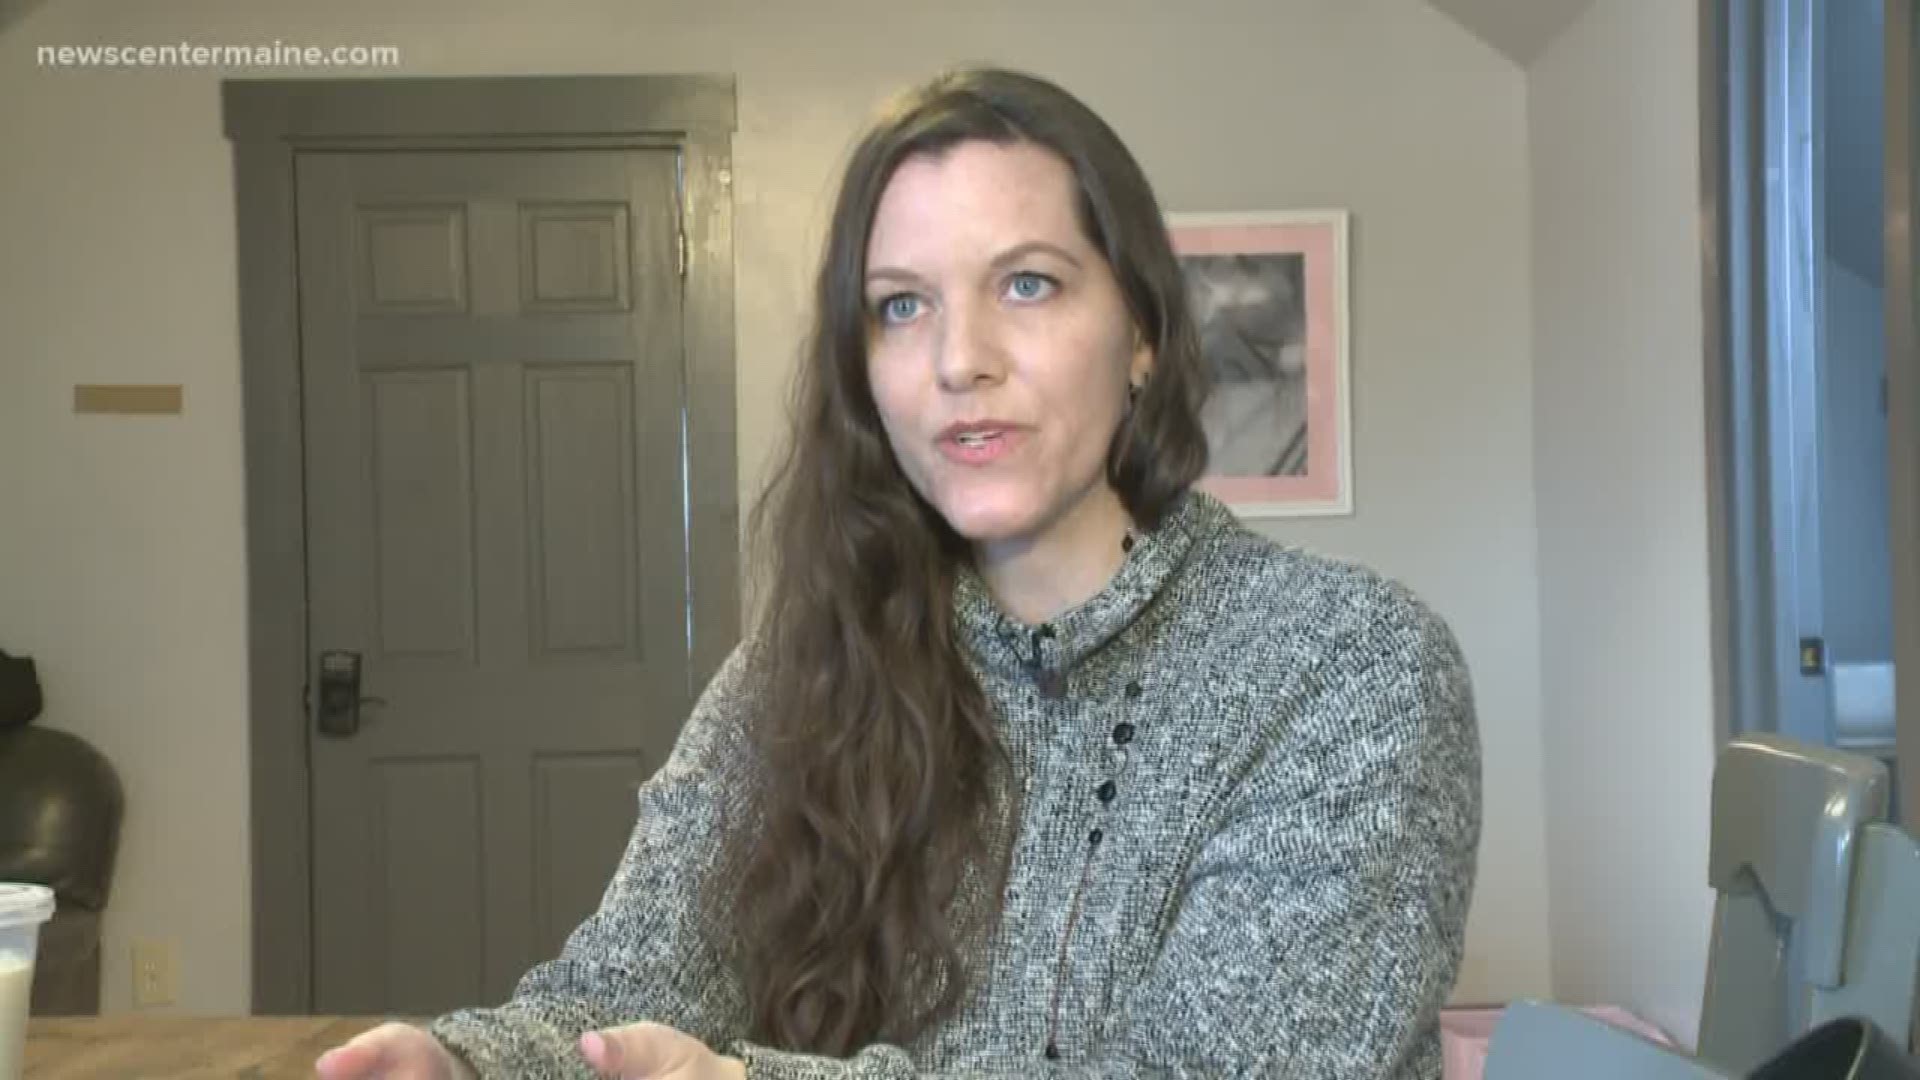 Former sex trafficking victim, Trisha Grant-Gregoire, from Maine speaks out about her experience and how she hopes the Kraft case will bring this issue to light.